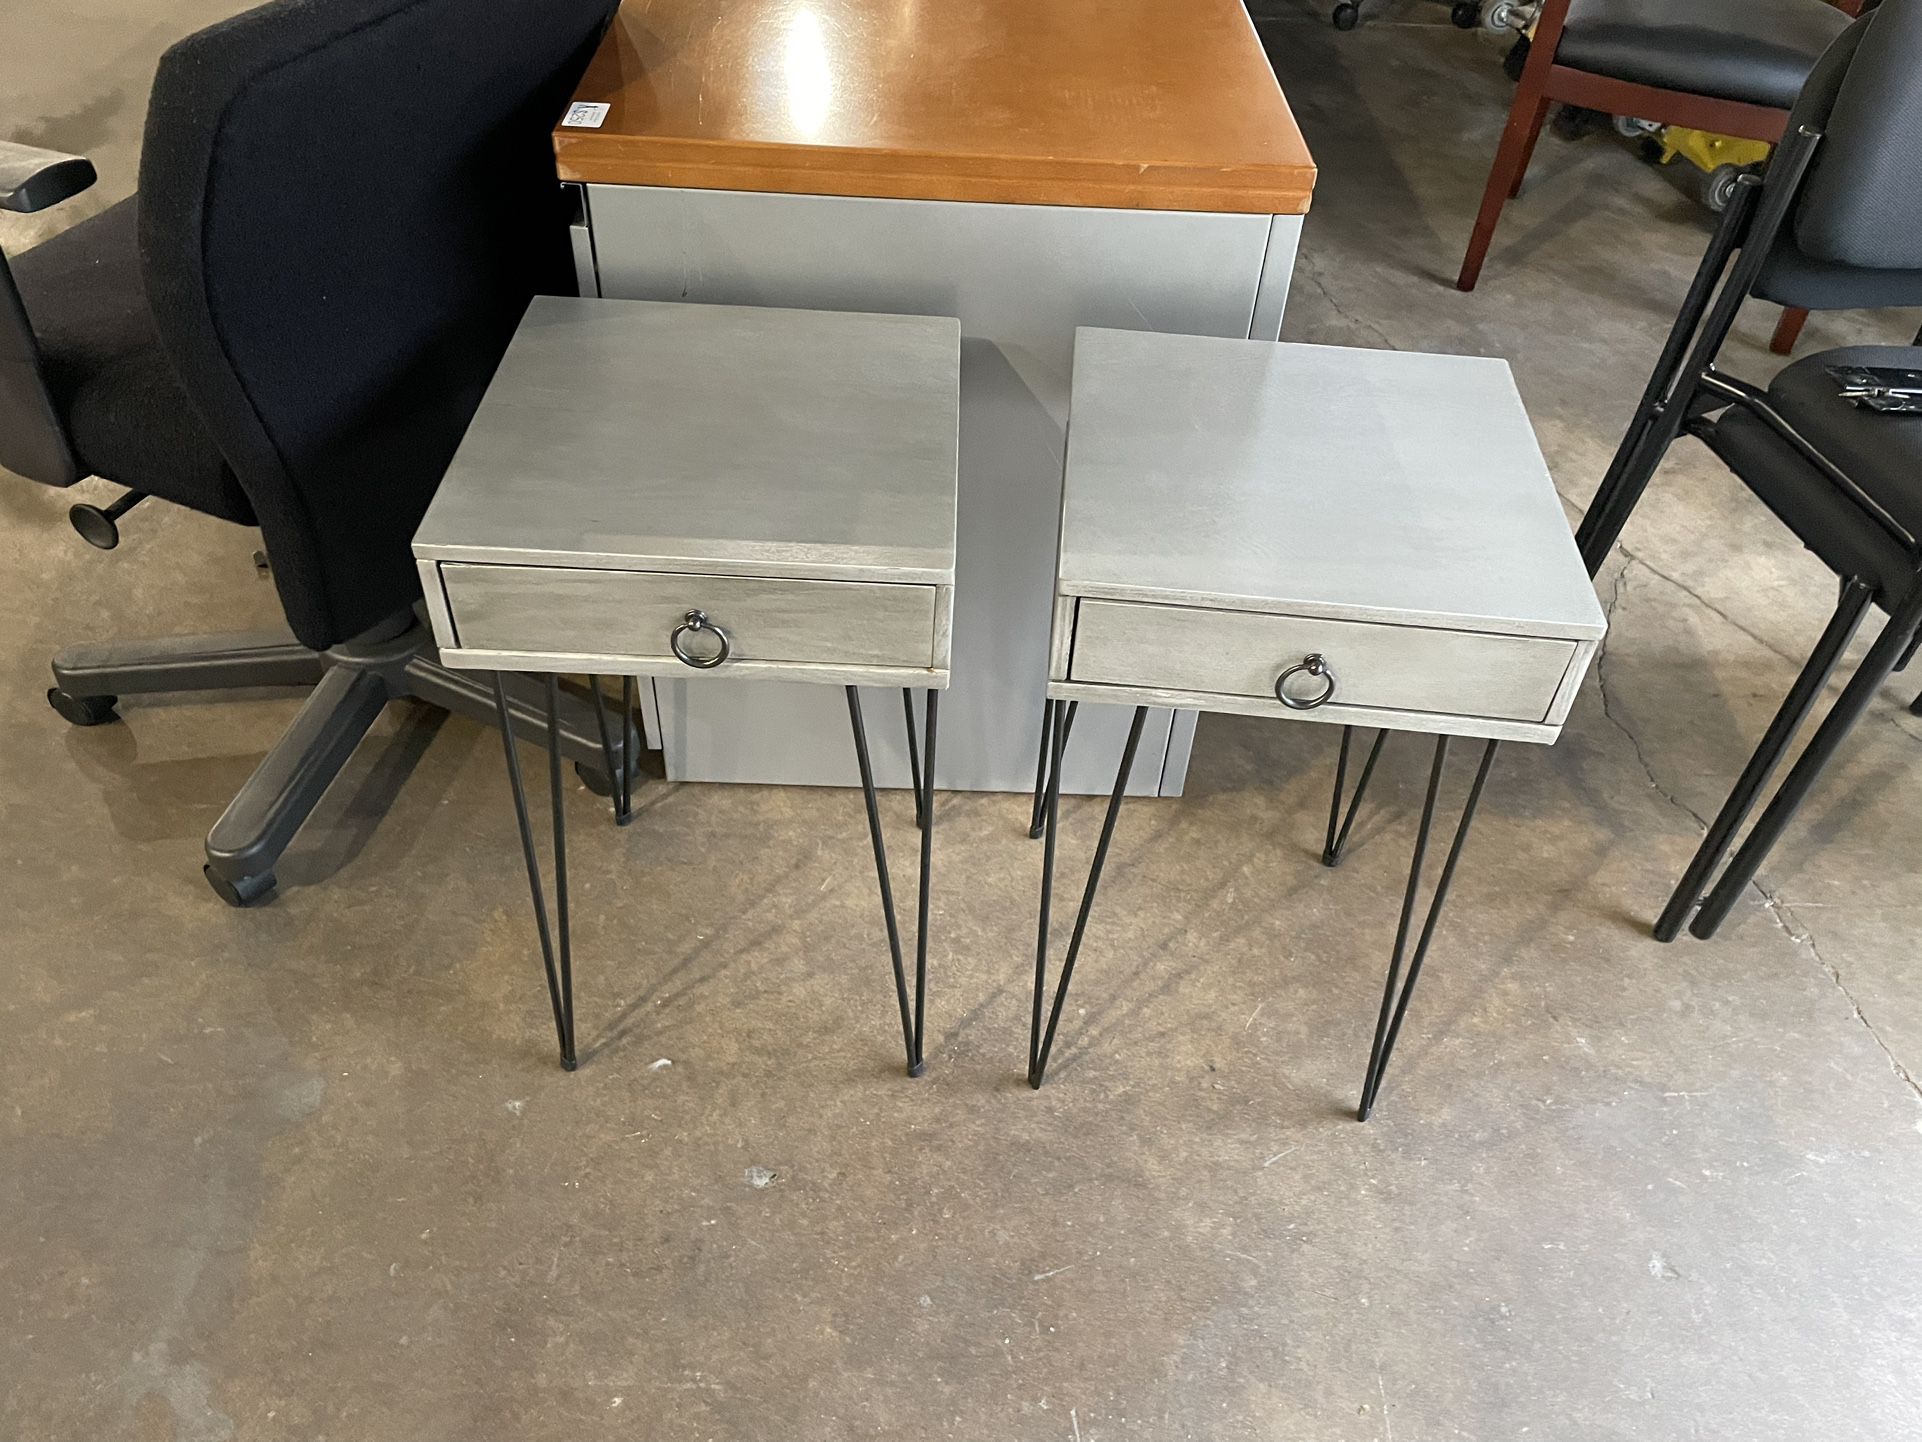 2 Matching Grey End Tables! Only $25 For Both!